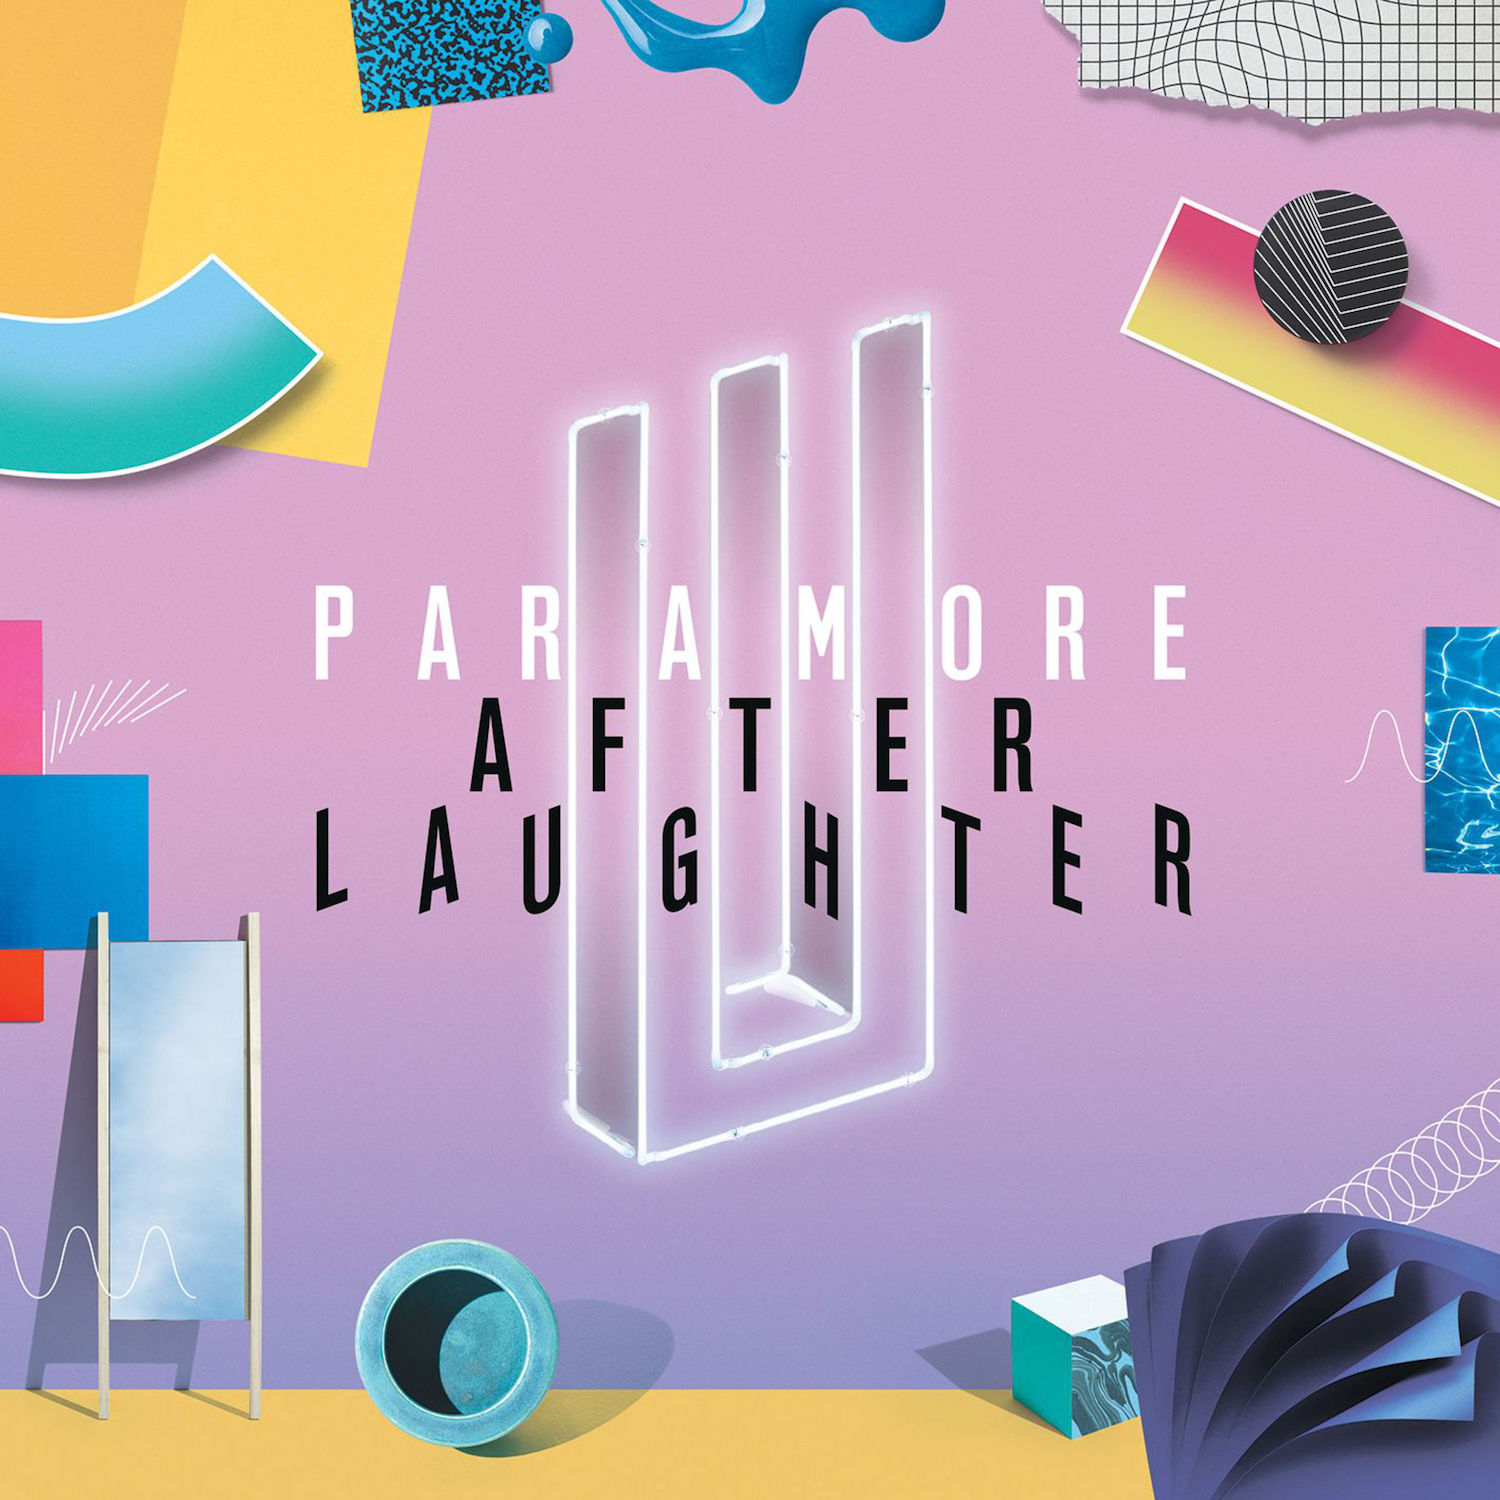 Put Yourself In A Paramore Album Cover!